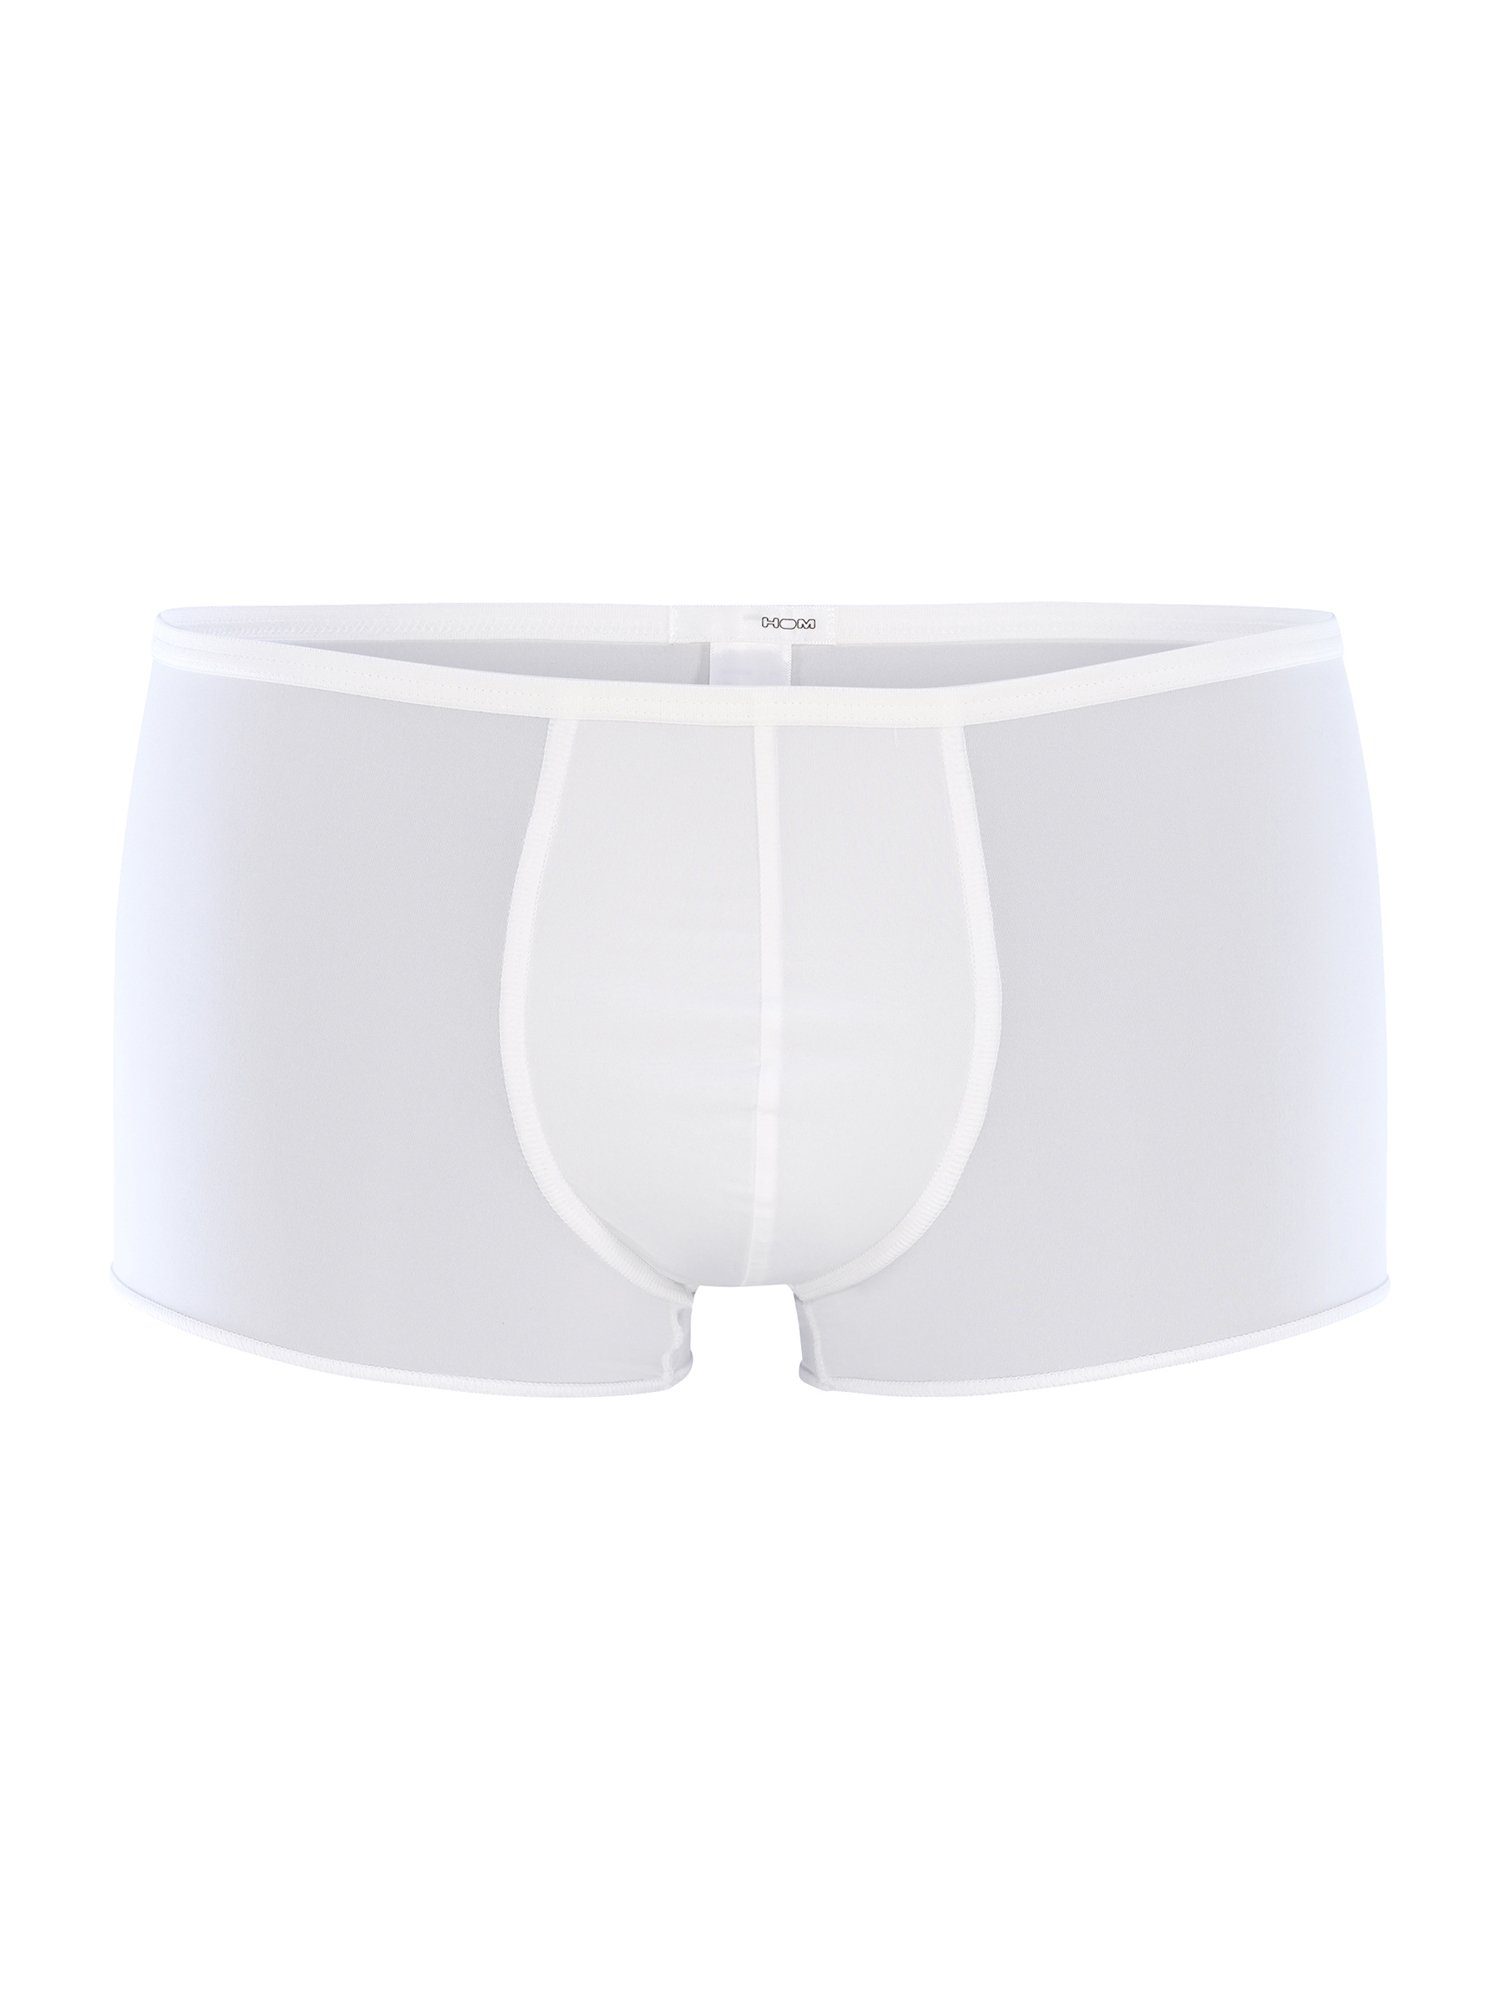 Hom Trunk Plumes white